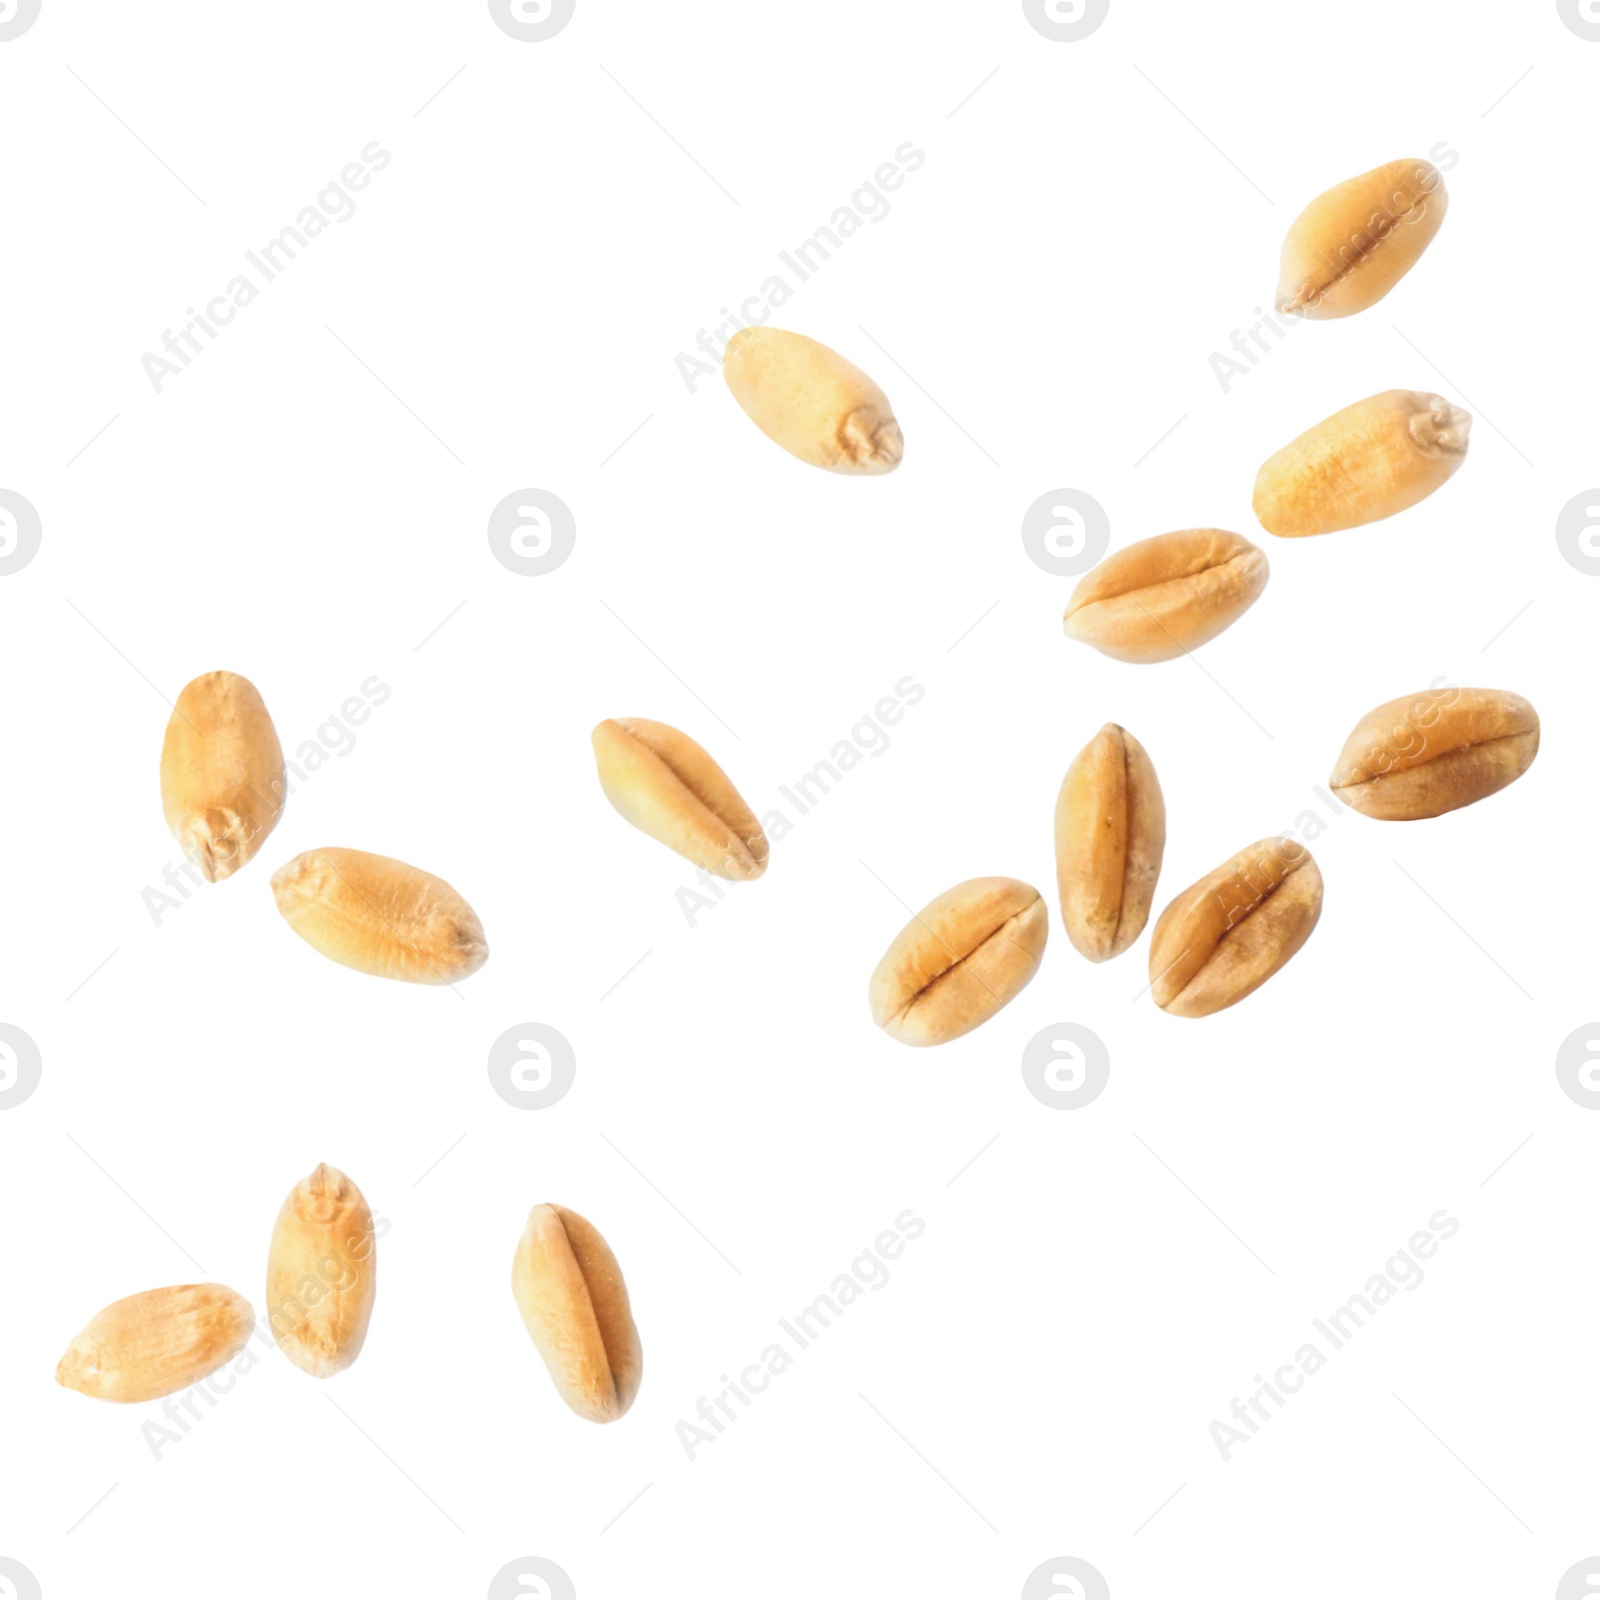 Image of Ripe wheat grains flying on white background